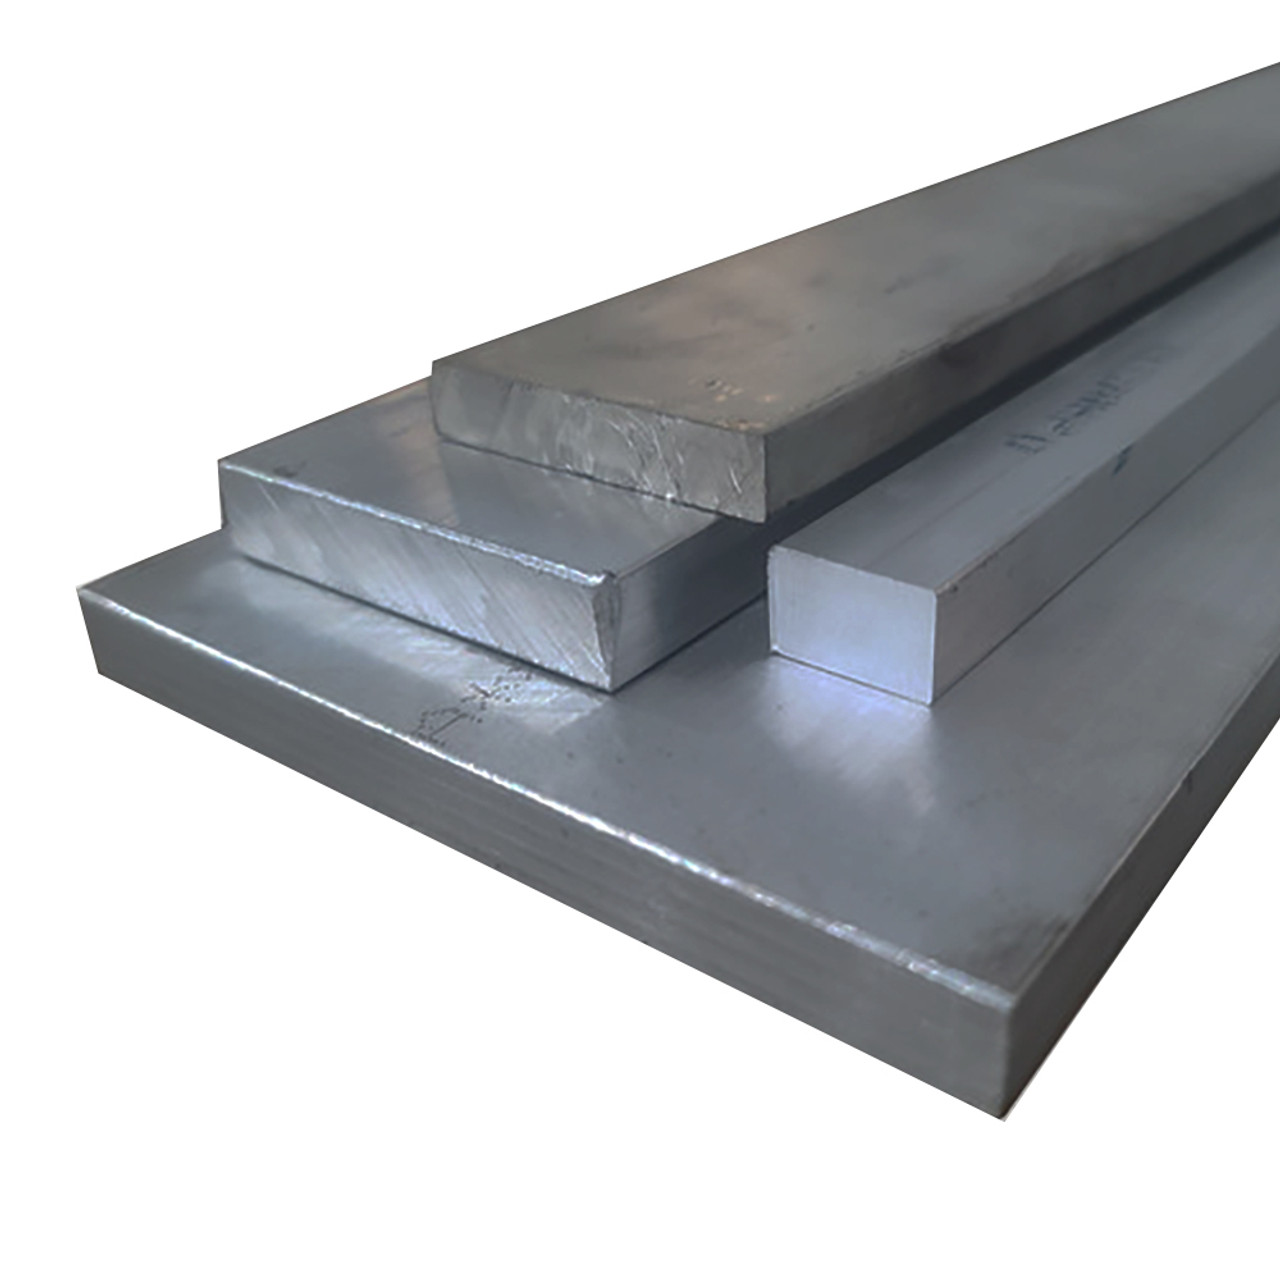 0.750" x 0.750" x 36", 4140 Alloy Steel Flat, Cold Finished, Annealed